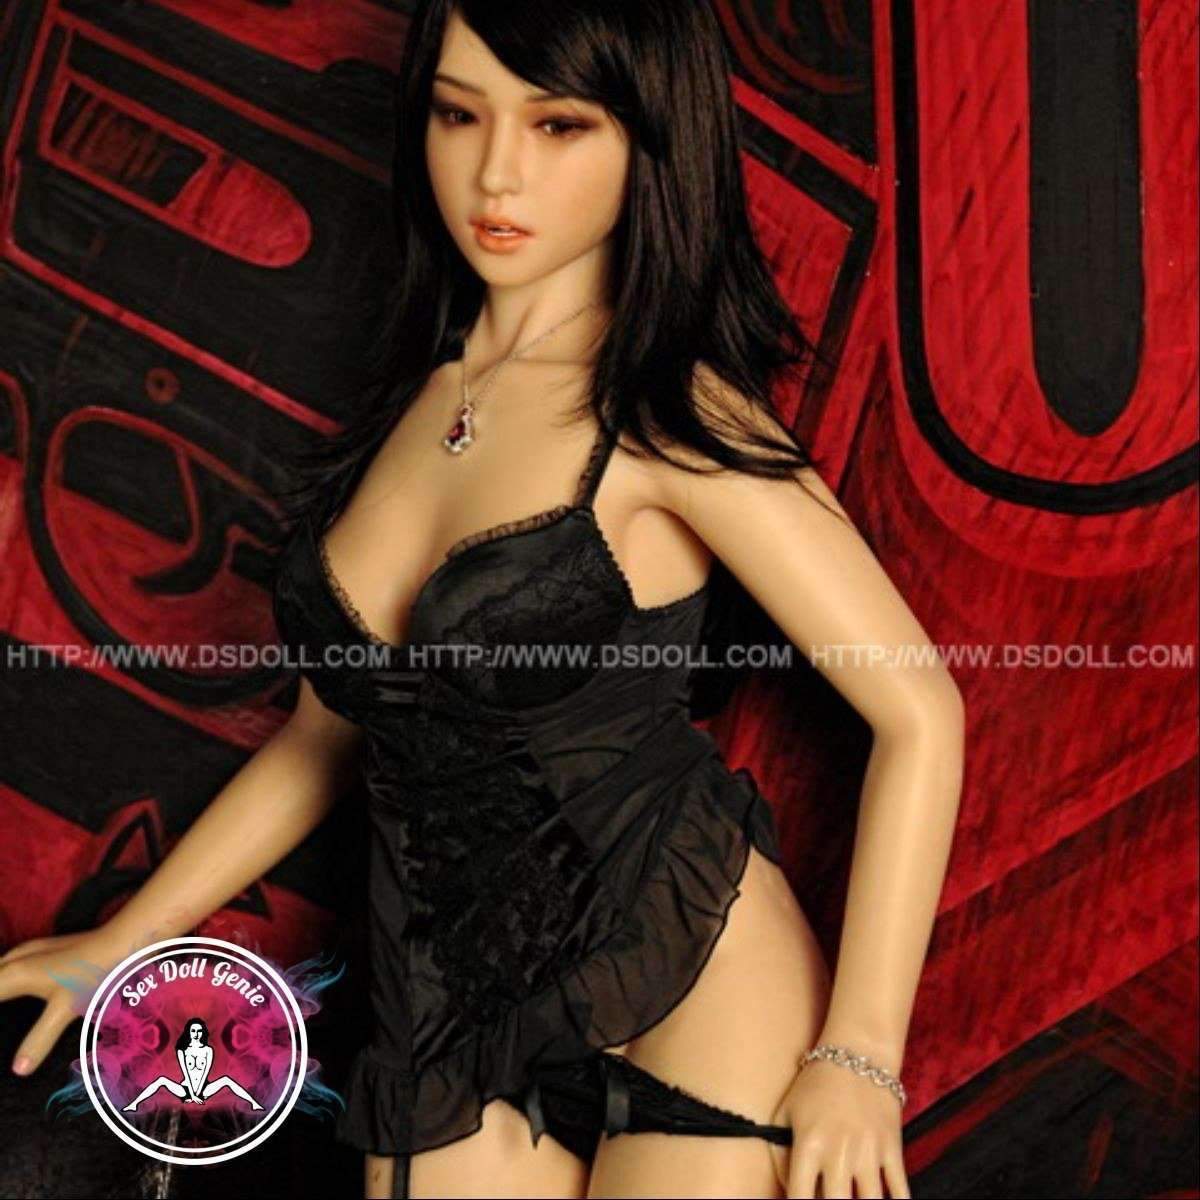 DS Doll - 160cm - Kayla Head - Type 1 D Cup Silicone Doll-5